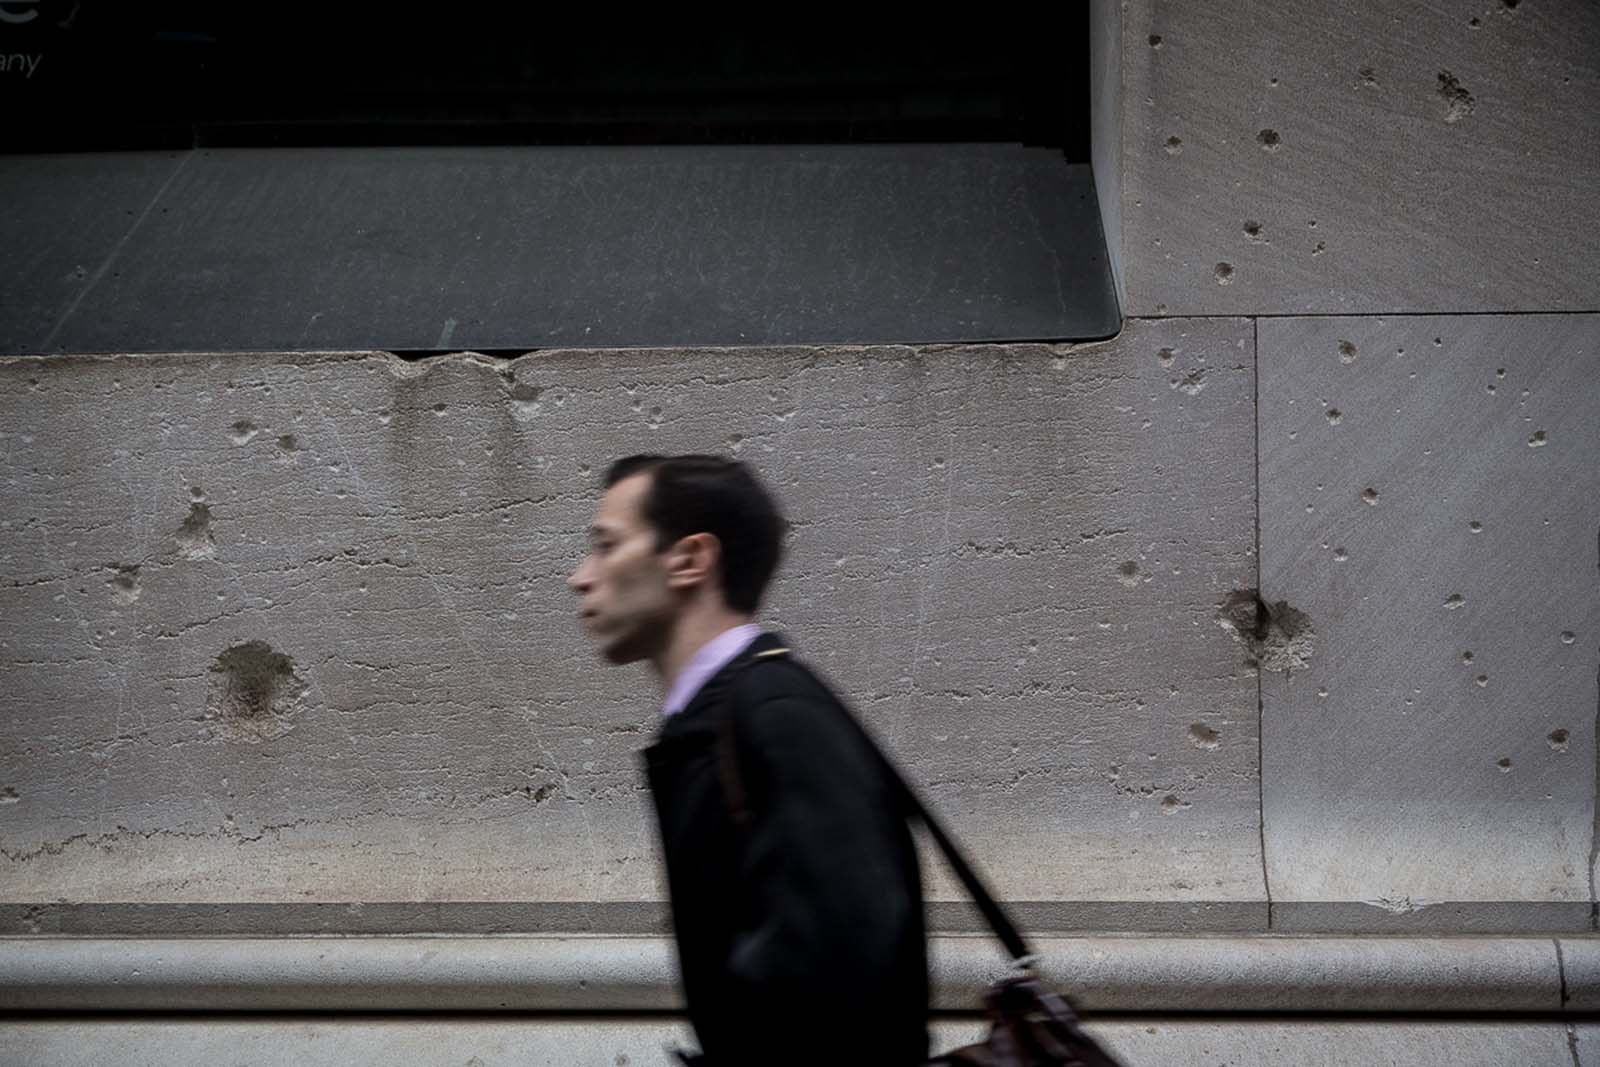 Shrapnel craters from the explosion still scar the facade of 23 Wall Street today.